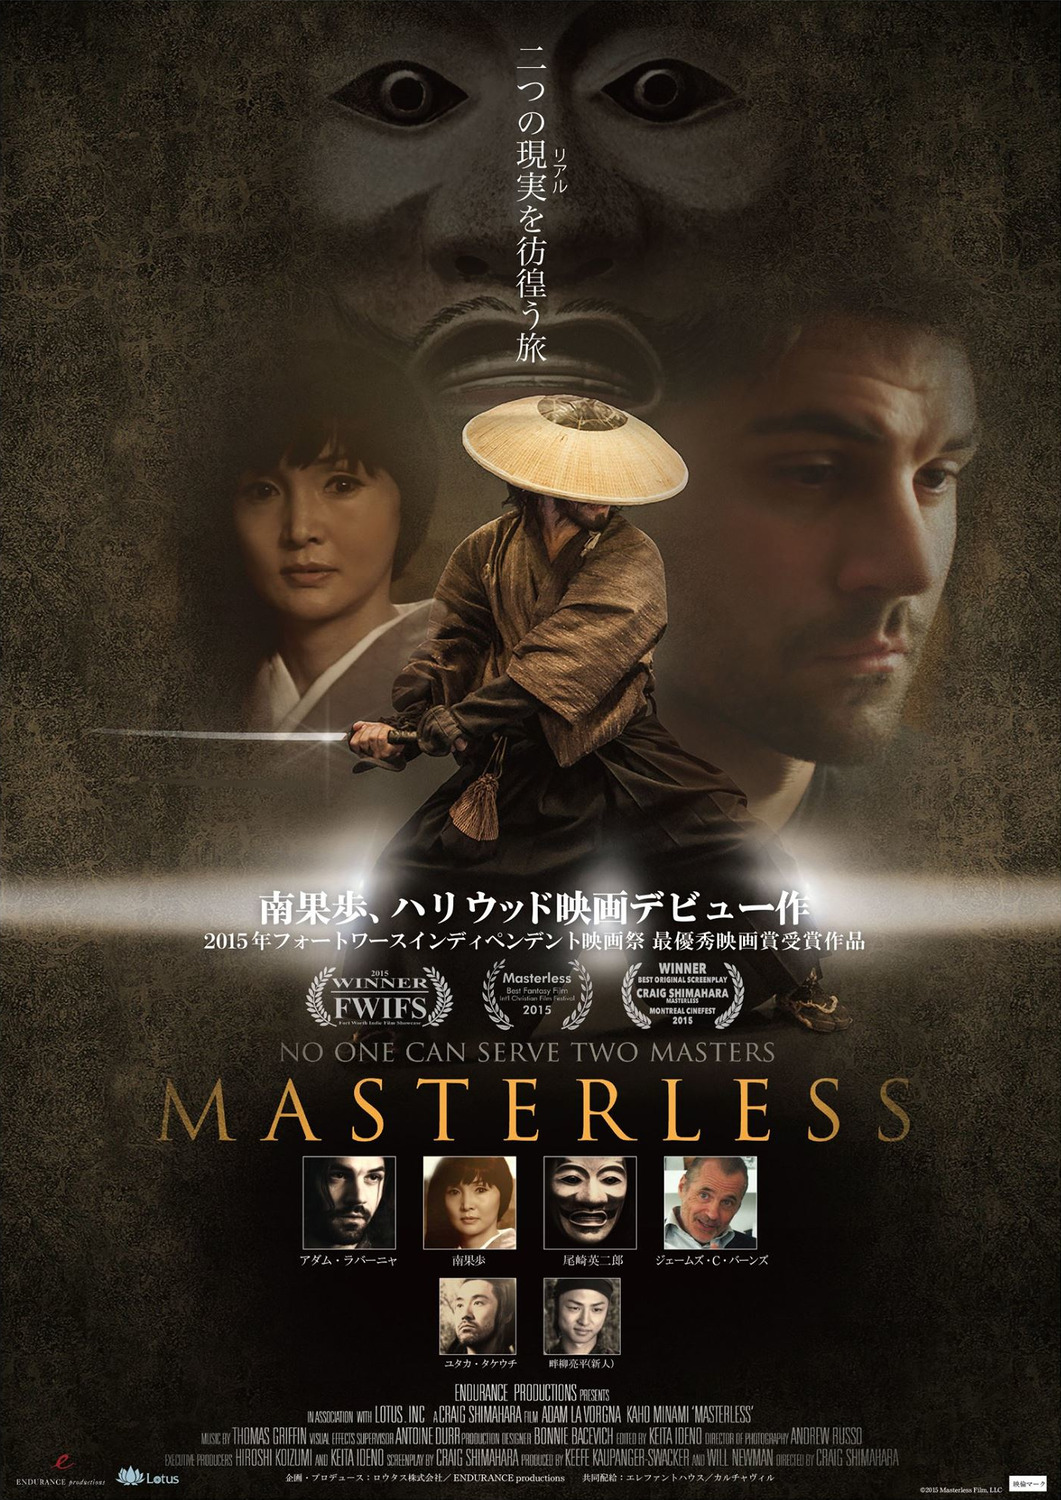 Extra Large Movie Poster Image for Masterless (#2 of 2)